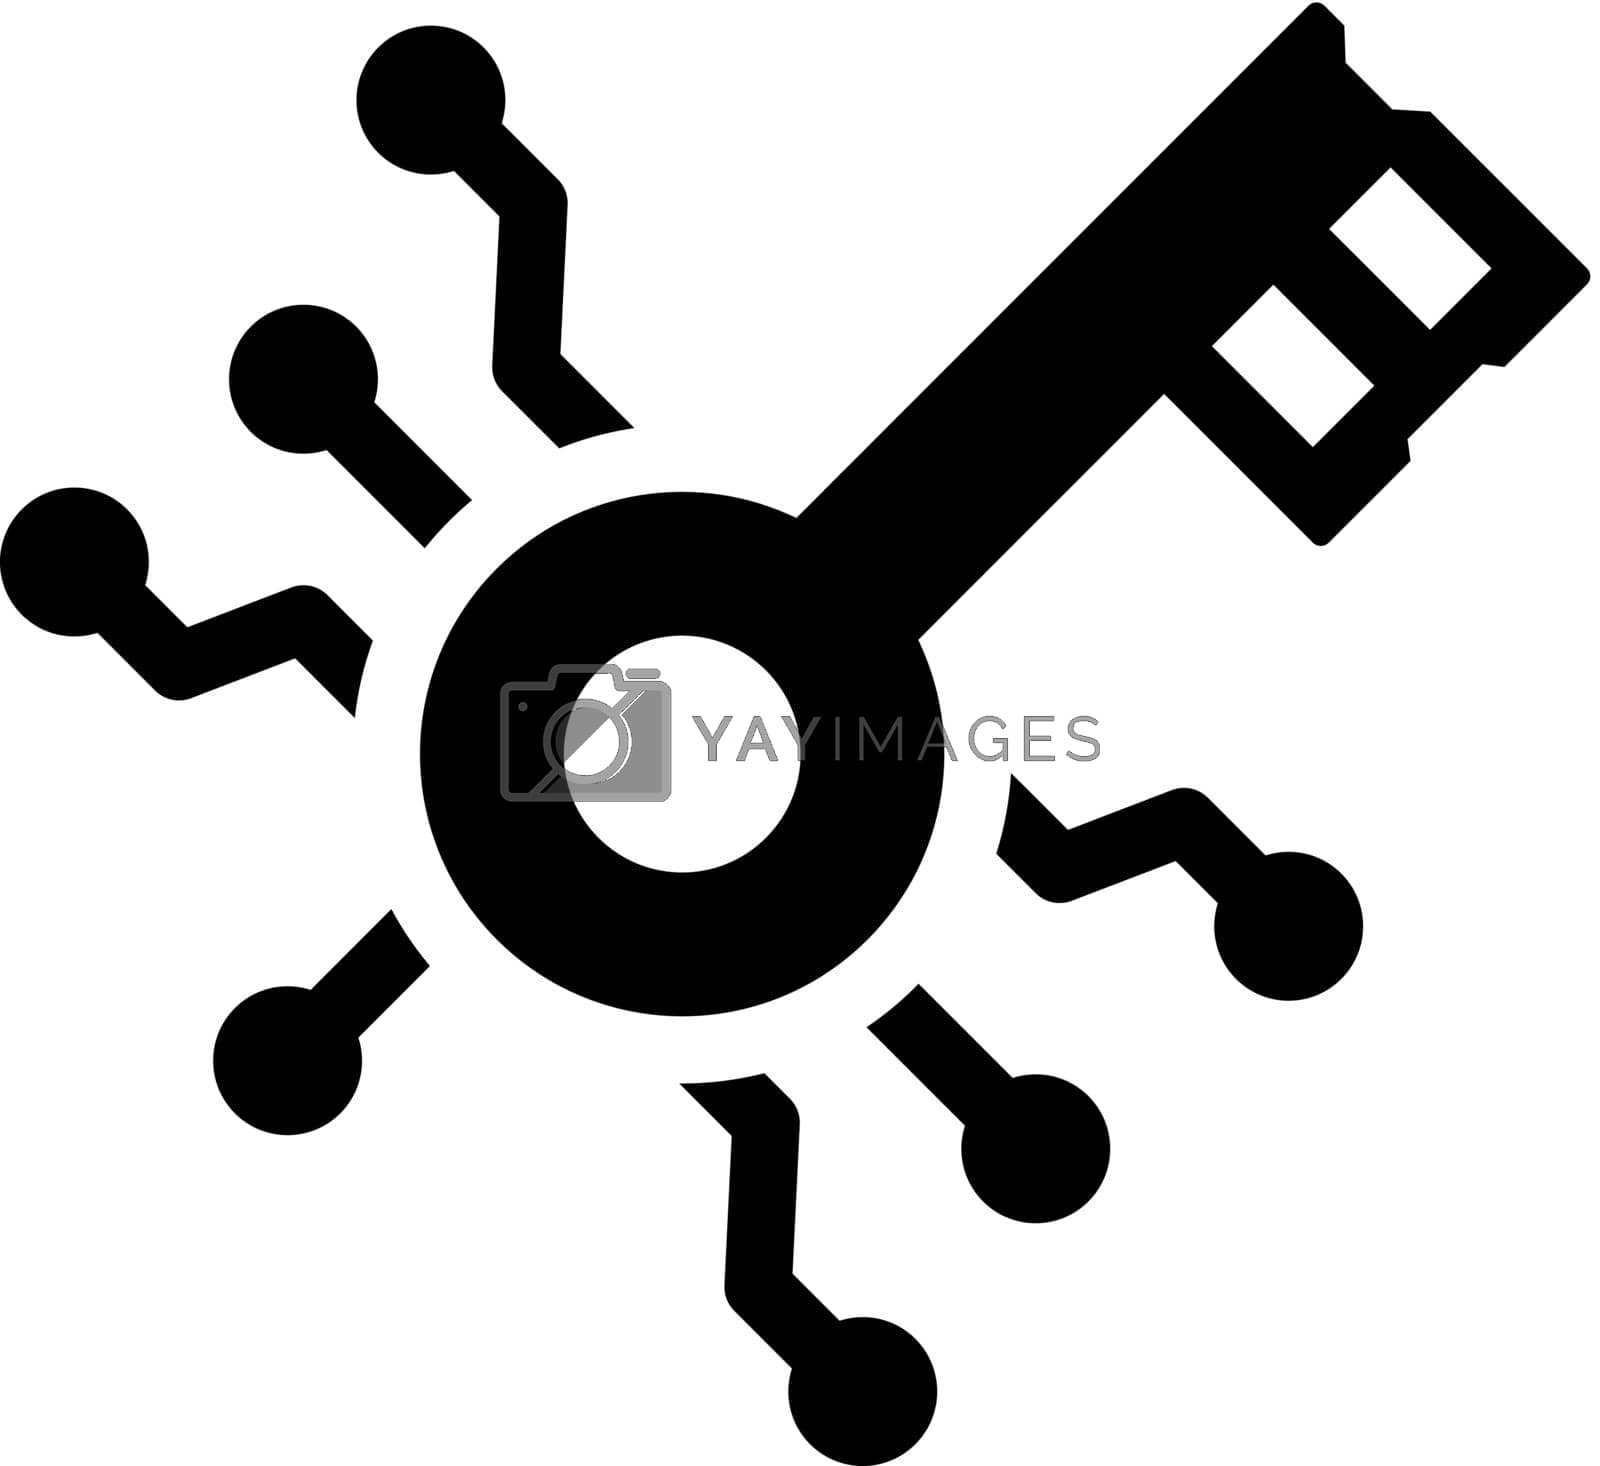 Royalty free image of Digital security key icon by delwar018